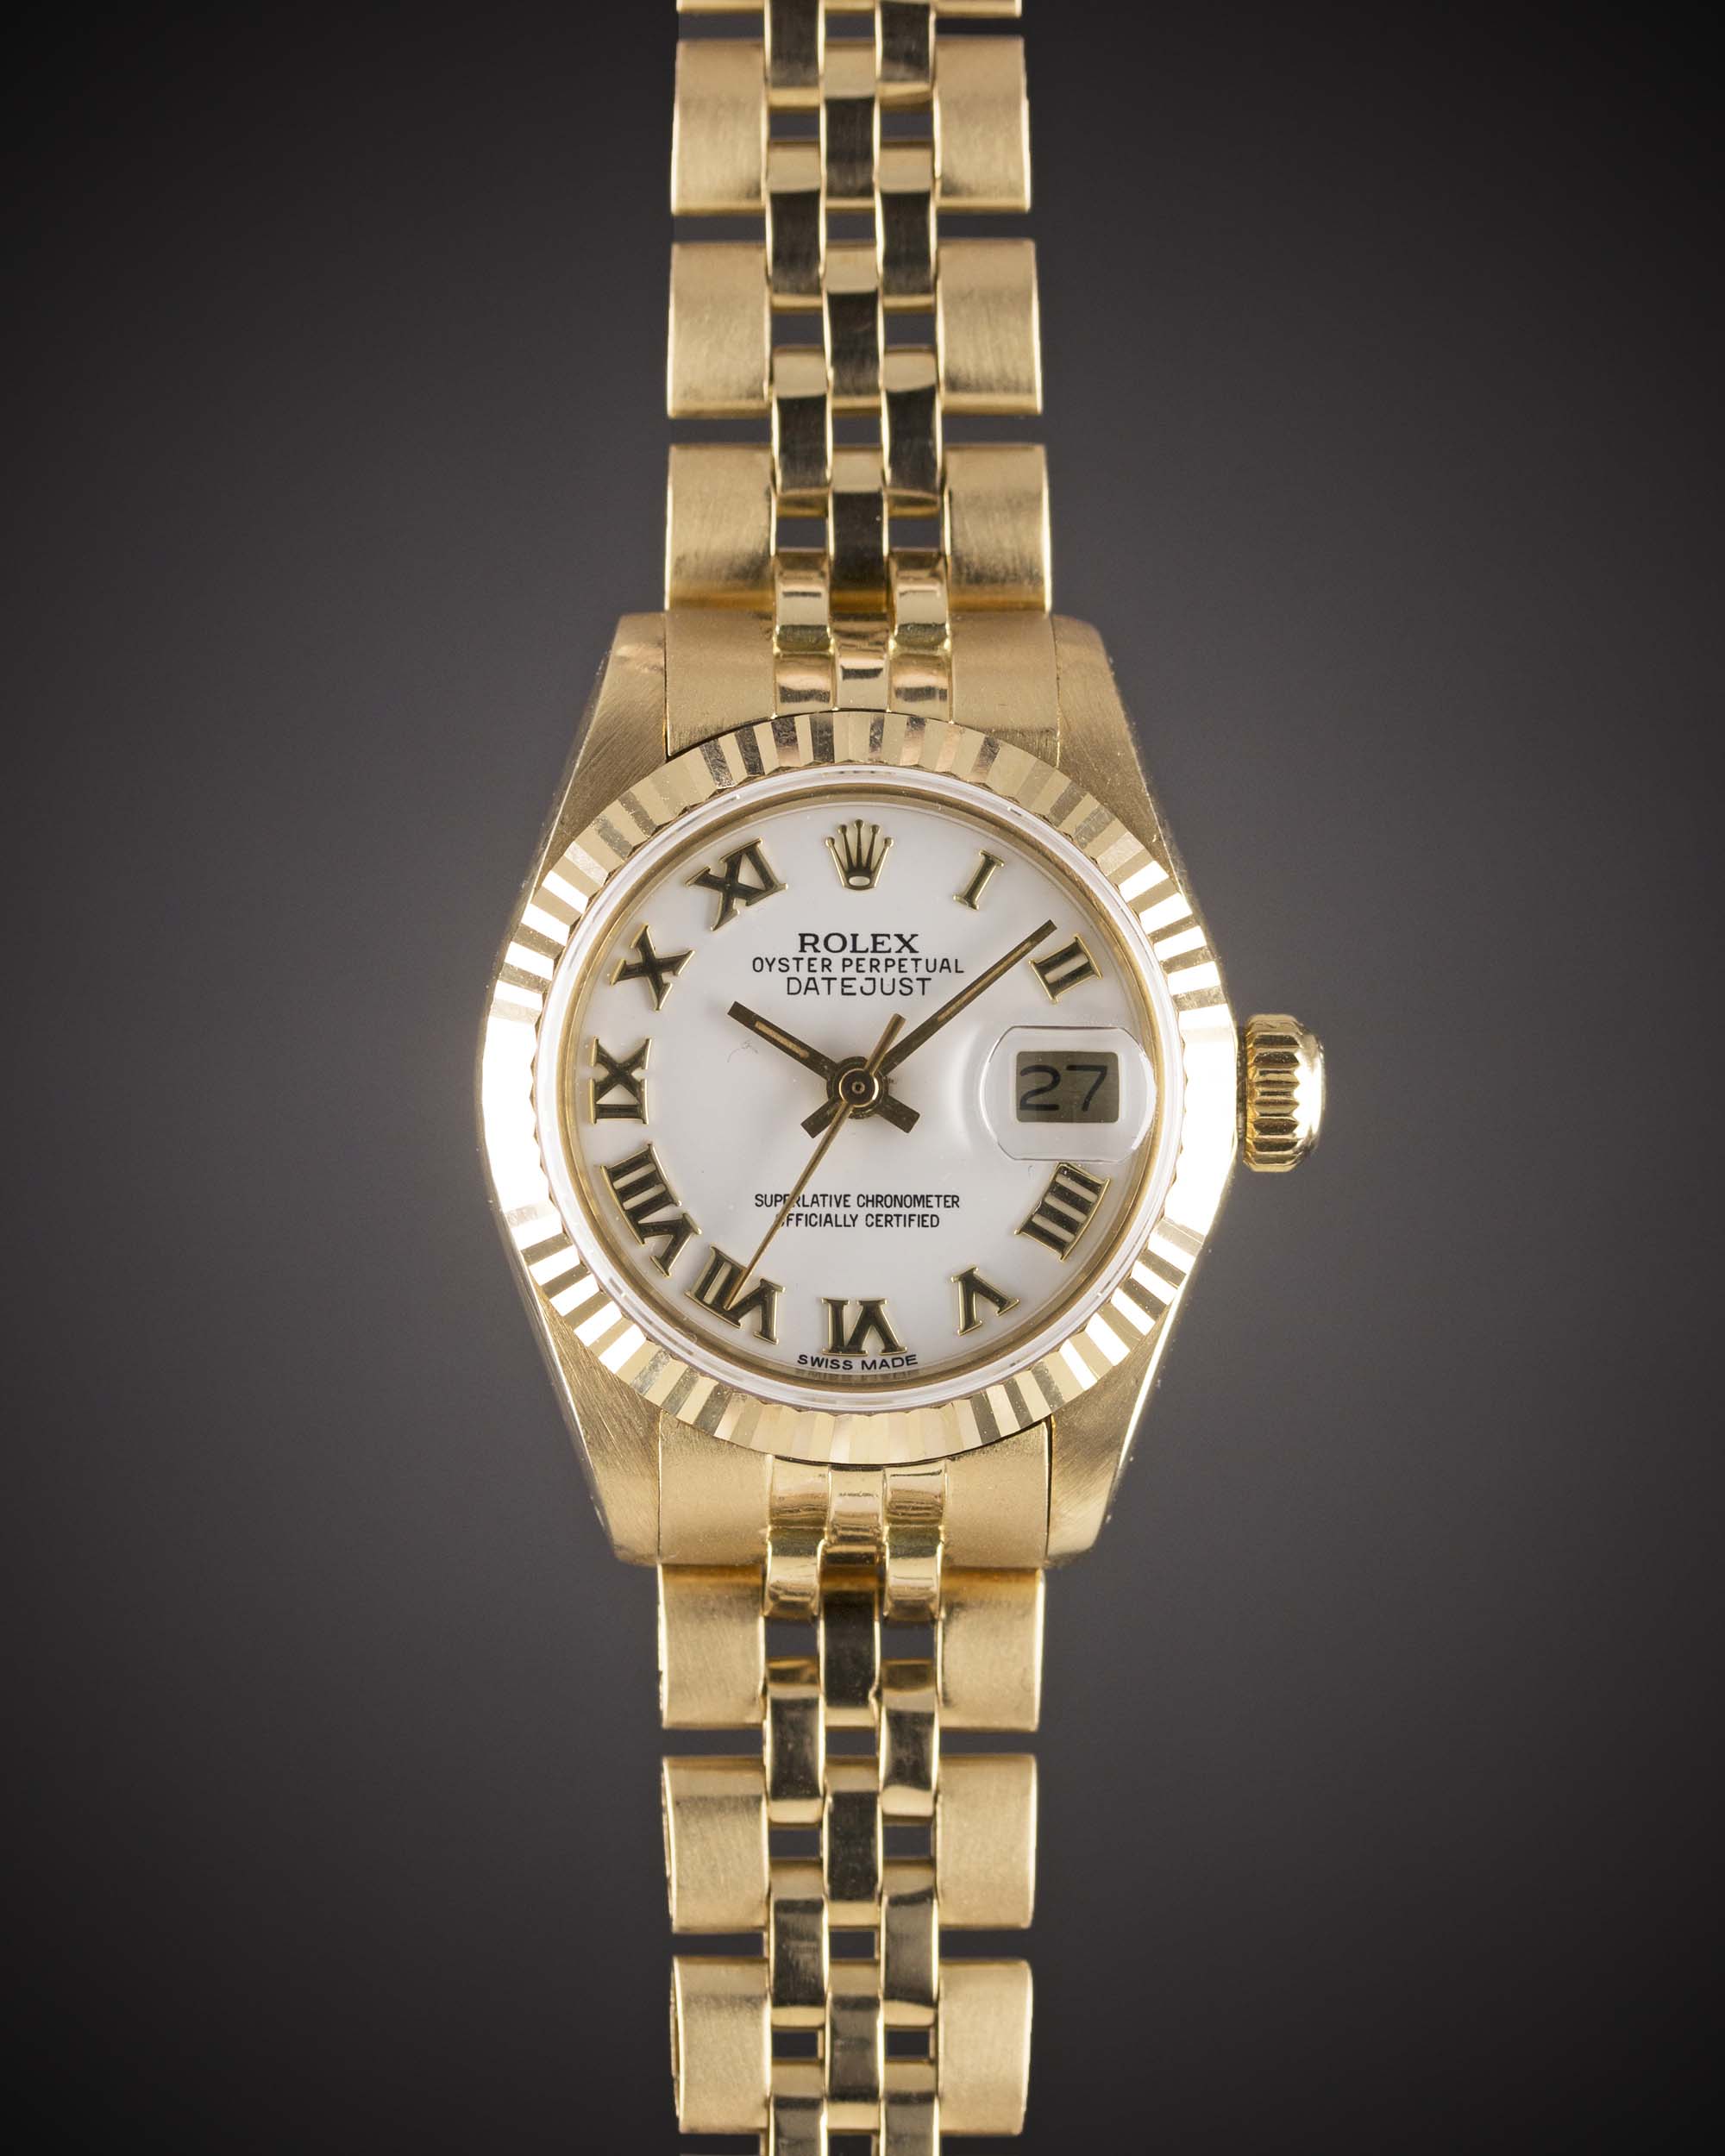 A LADIES 18K SOLID GOLD ROLEX OYSTER PERPETUAL DATEJUST BRACELET WATCH CIRCA 1978, REF. 6917 WITH